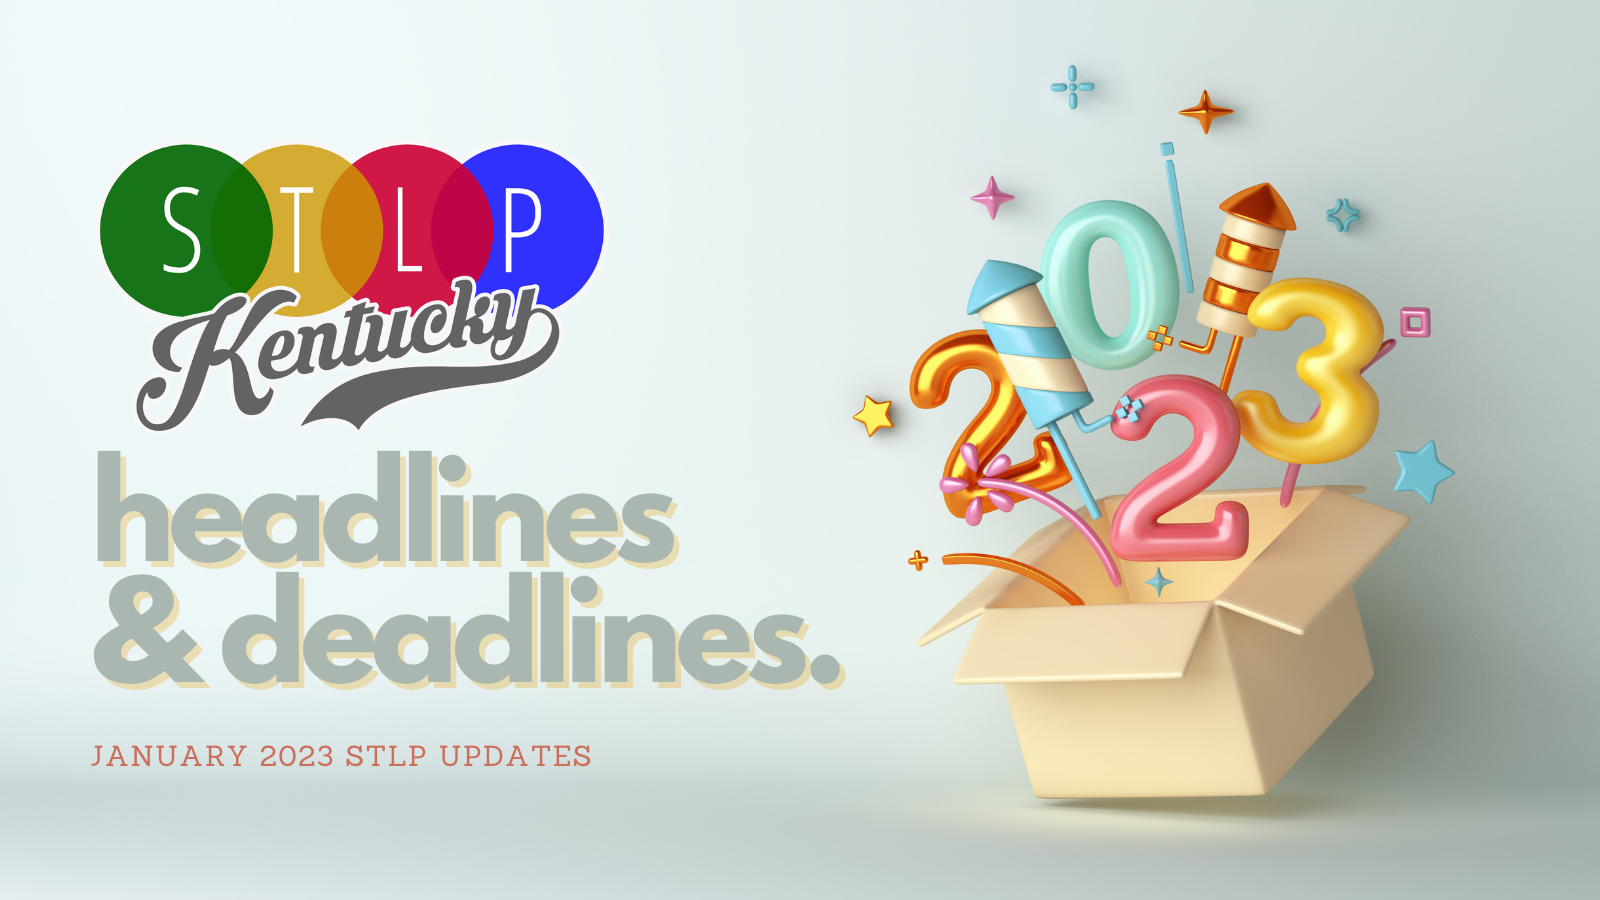 Image highlighting the latest STLP Updates called "Headlines and Deadlines"